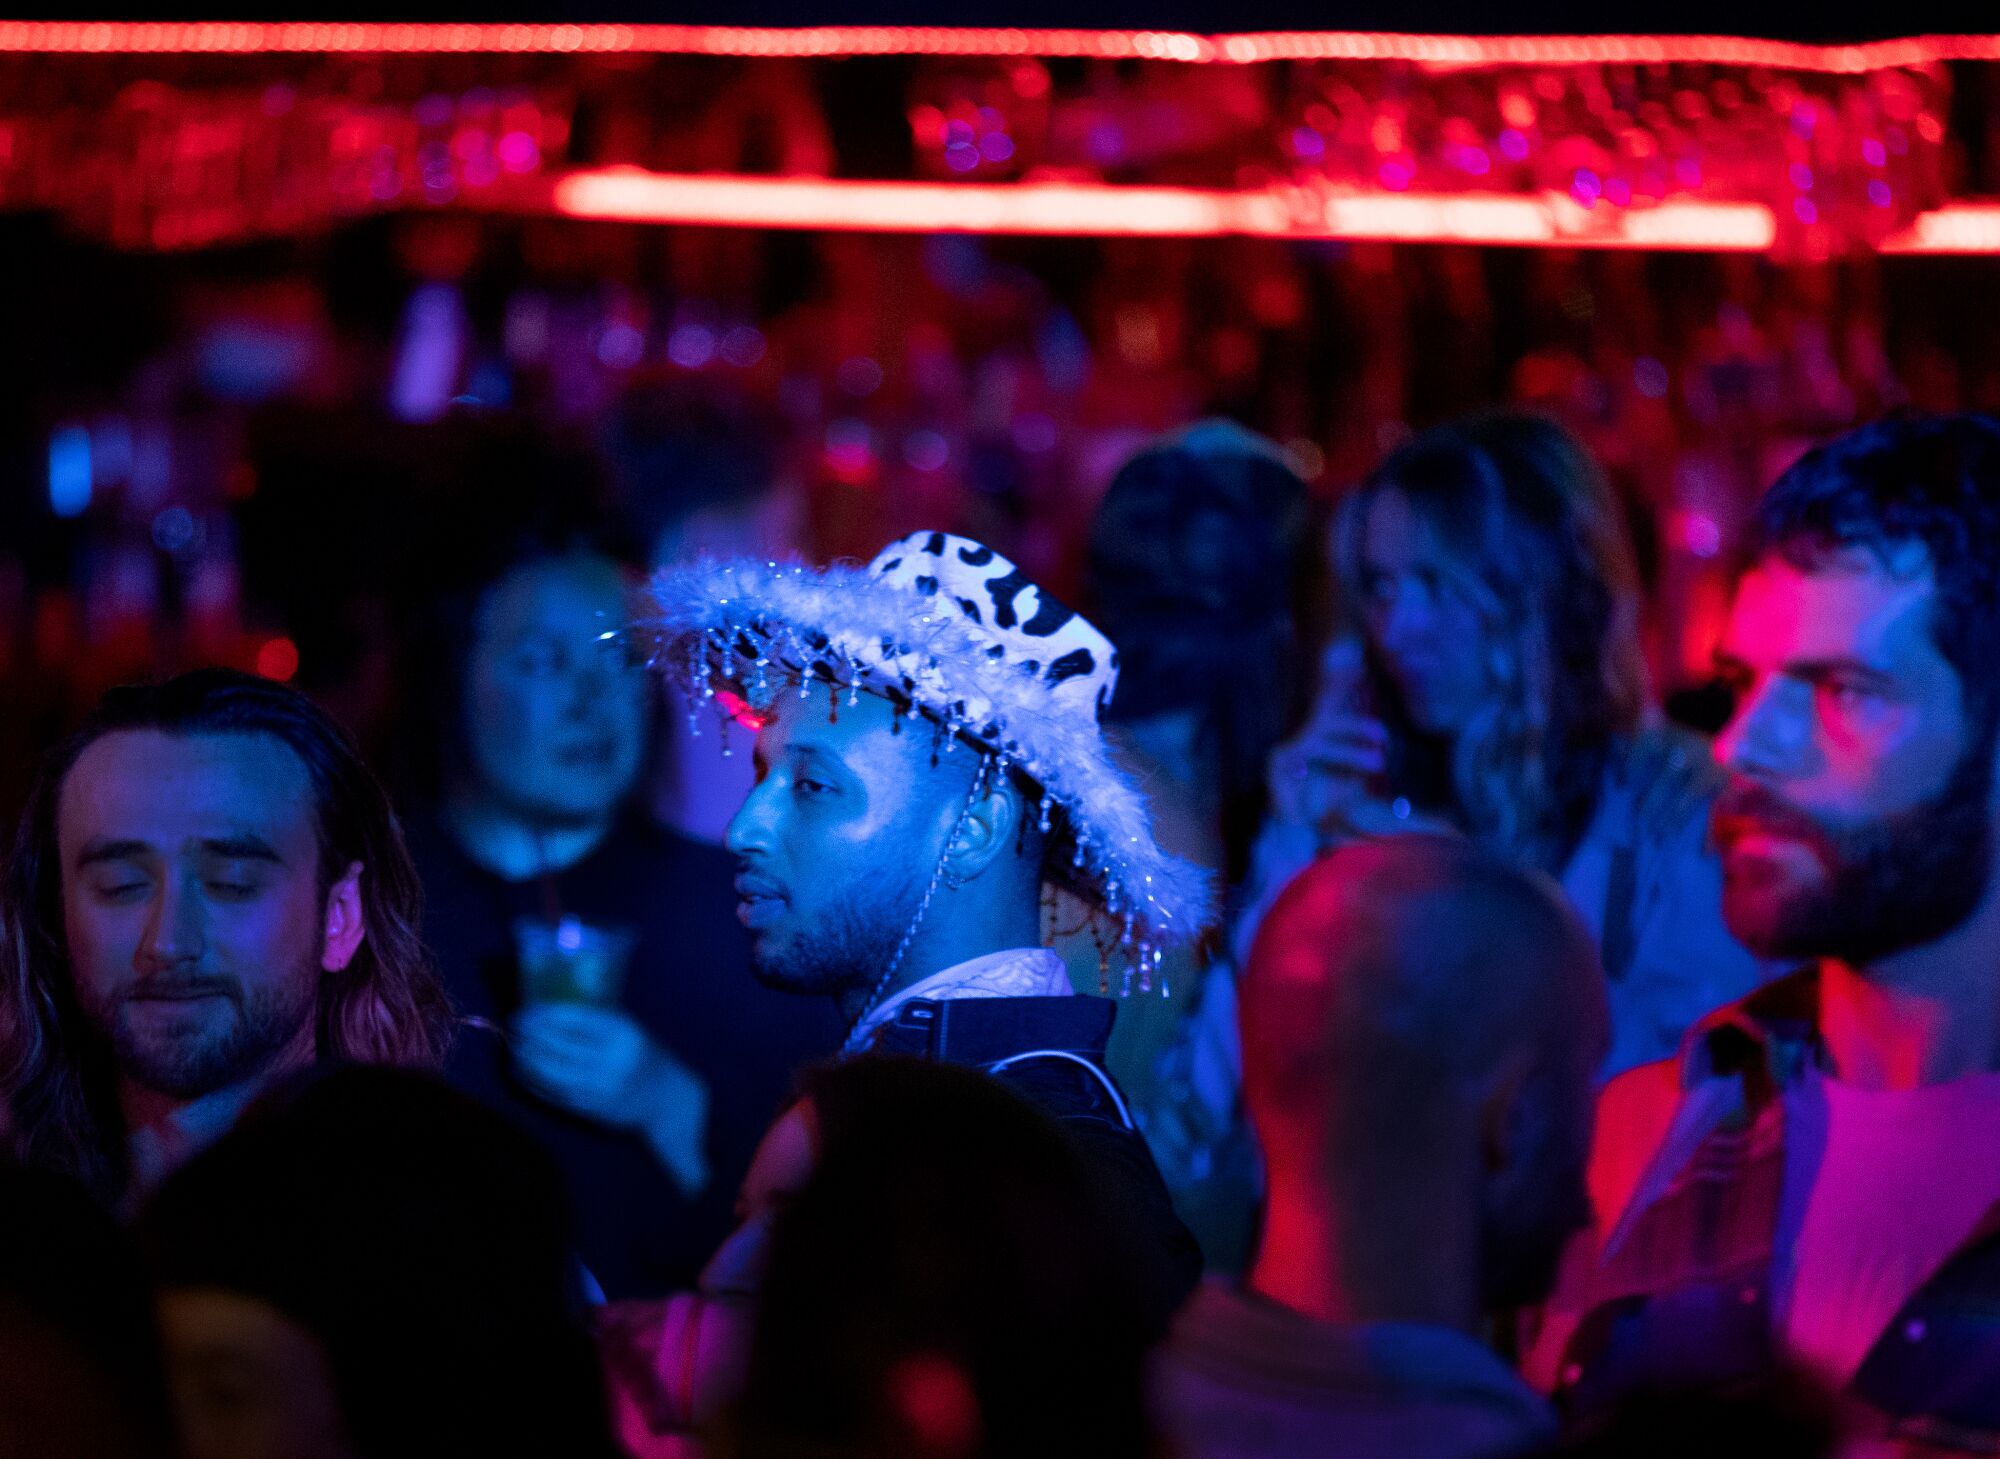 A person wearing a decorative western hat joins the crowd watching people dance together at Stud Country.